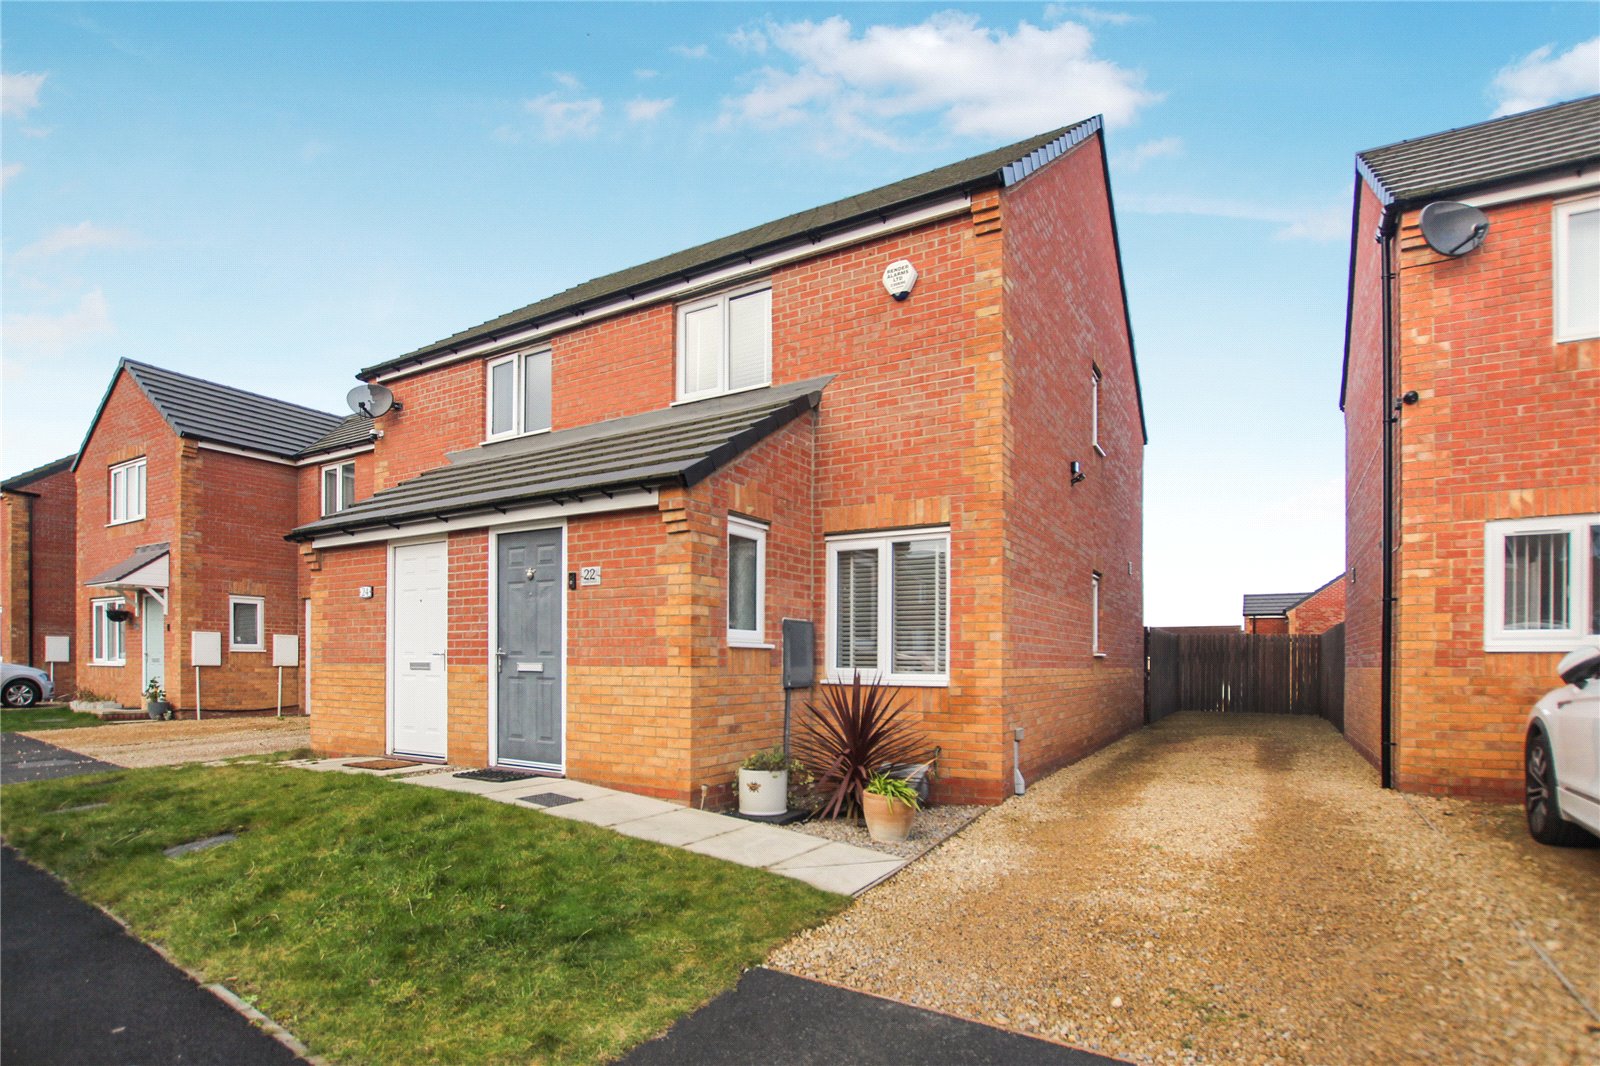 2 bed house for sale in Acklam Gardens, Middlesbrough - Property Image 1